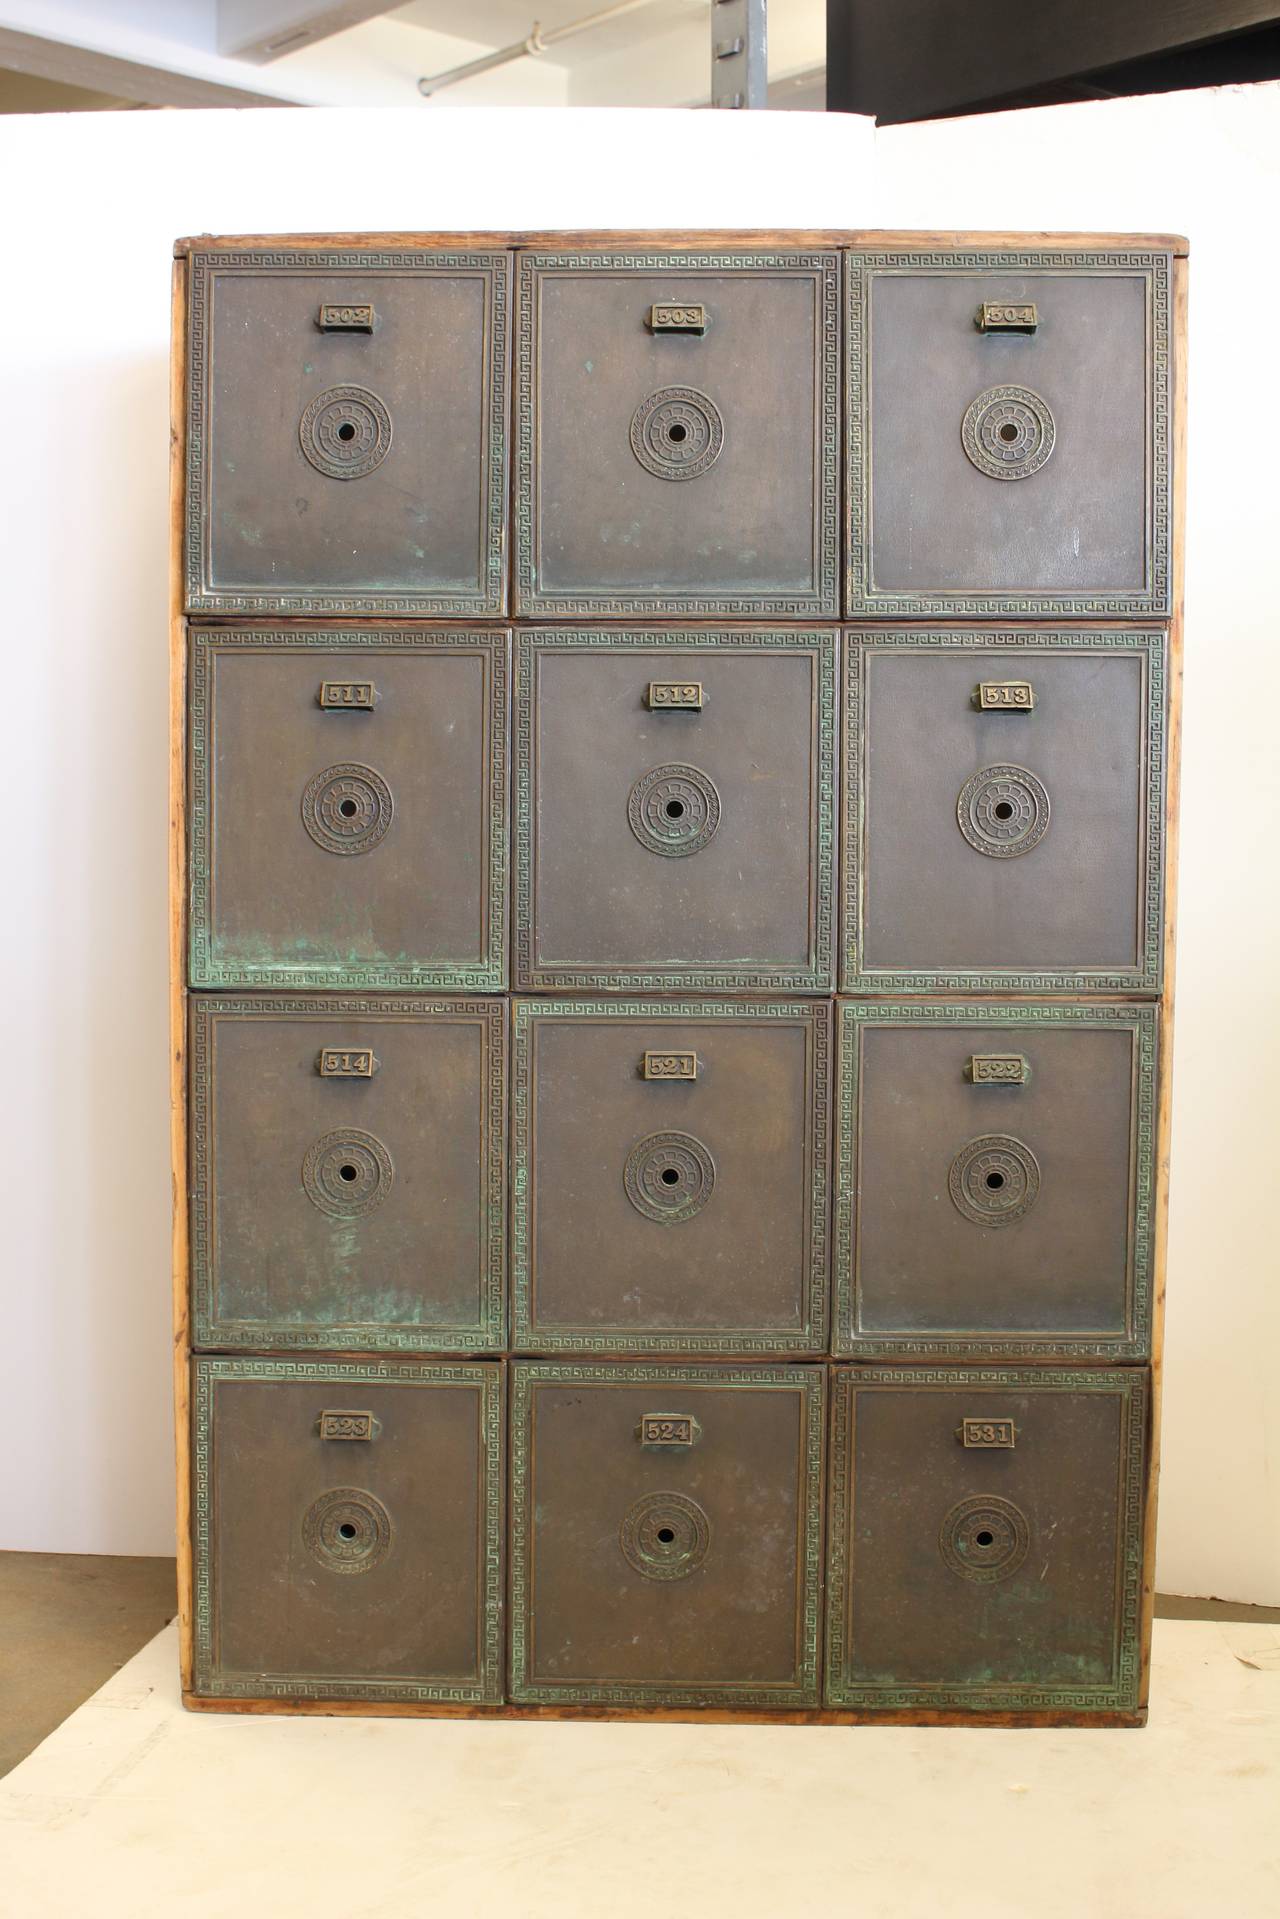 Great antique safety deposit box unit with wooden frame and bronze drawers.